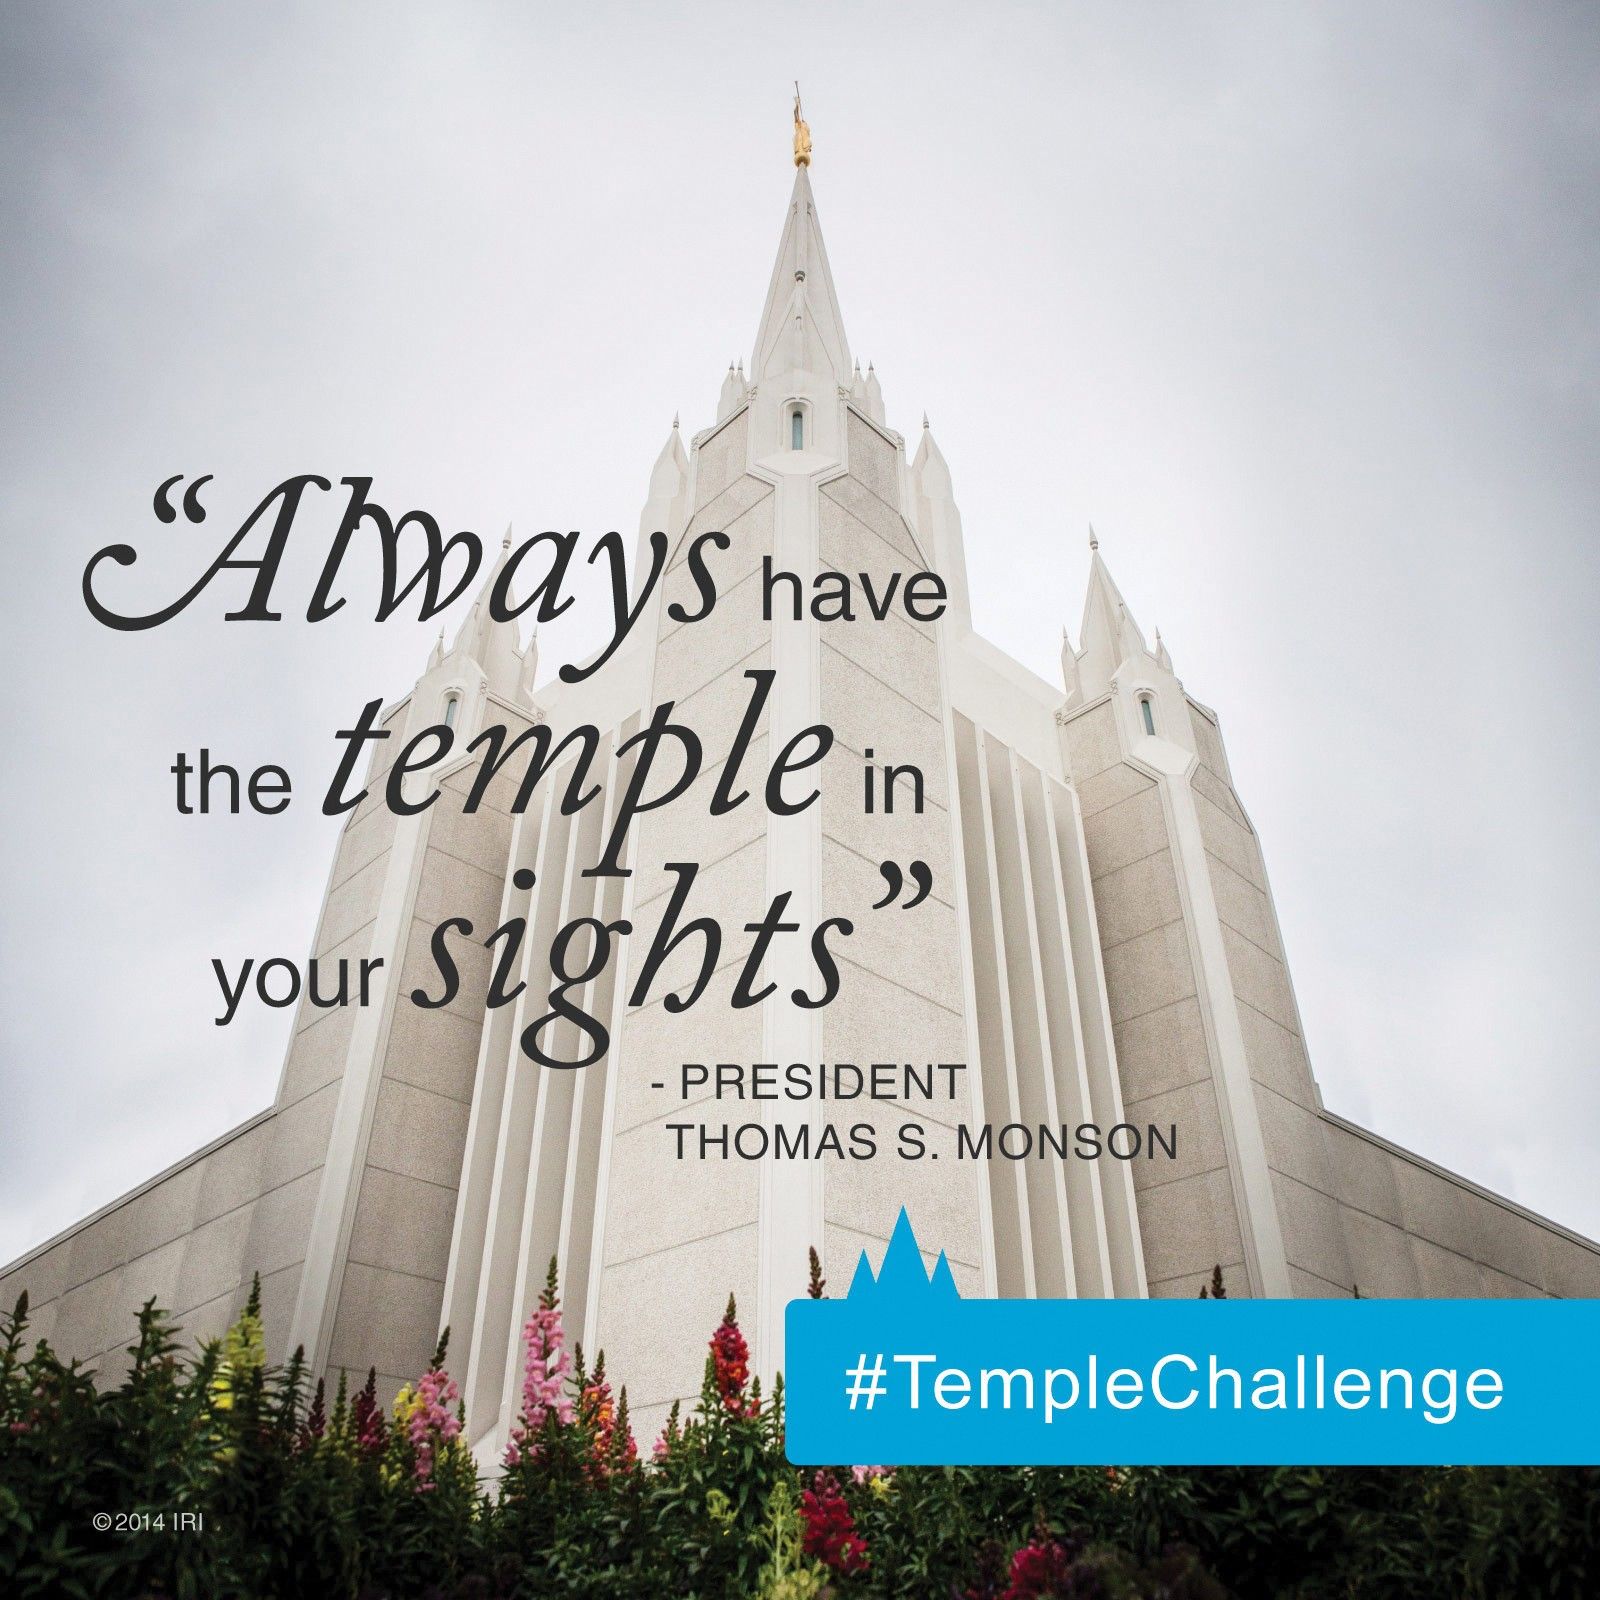 “Now, my young friends who are in your teenage years, always have the temple in your sights. Do nothing which will keep you from entering its doors and partaking of the sacred and eternal blessings there.”—President Thomas S. Monson, “The Holy Temple—a Beacon to the World” Learn more about keeping your sights on the temple by accepting the Youth Temple Challenge.